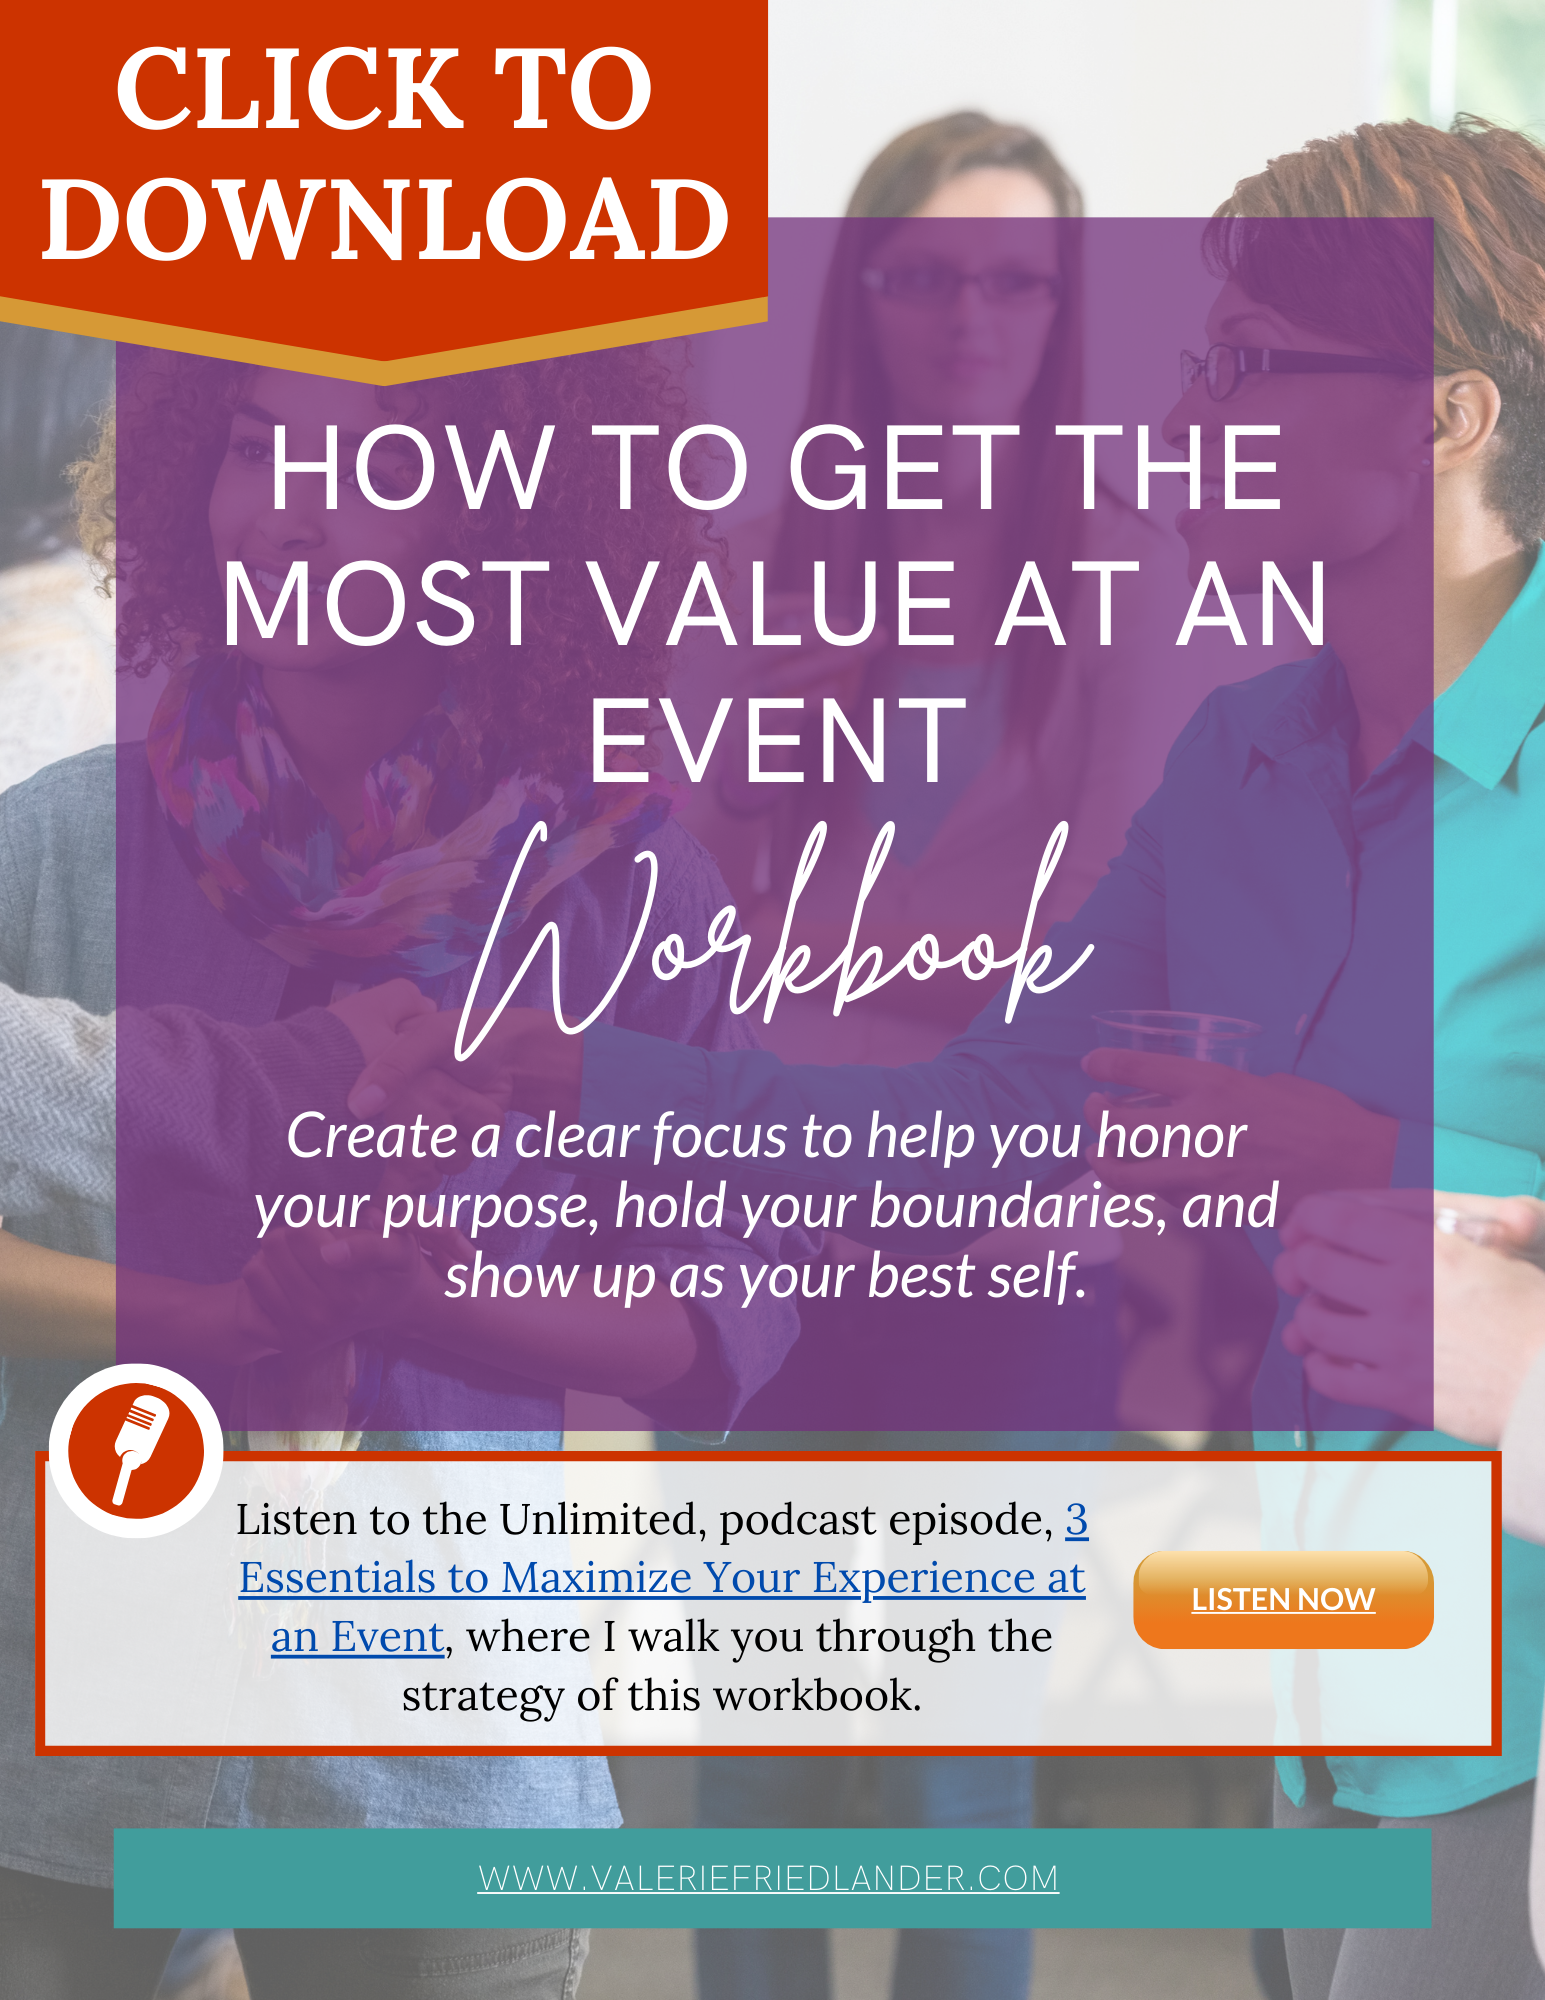 How to Get the Most Value at an Event